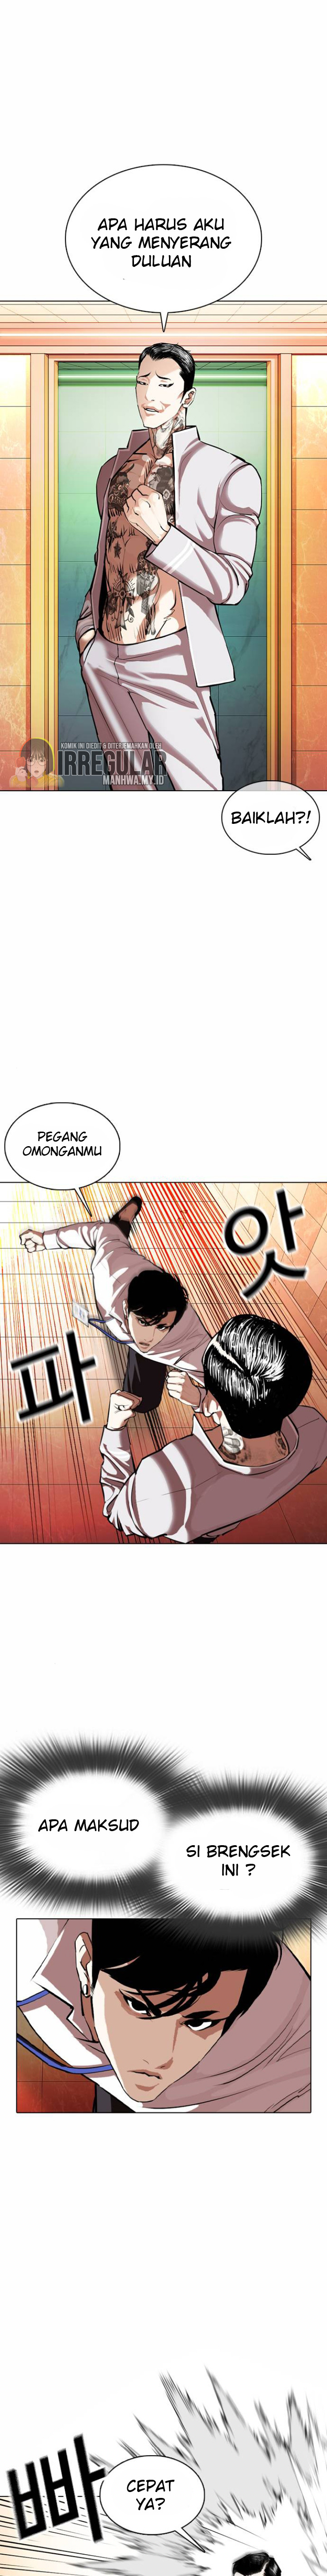 Lookism Chapter 361 Image 17